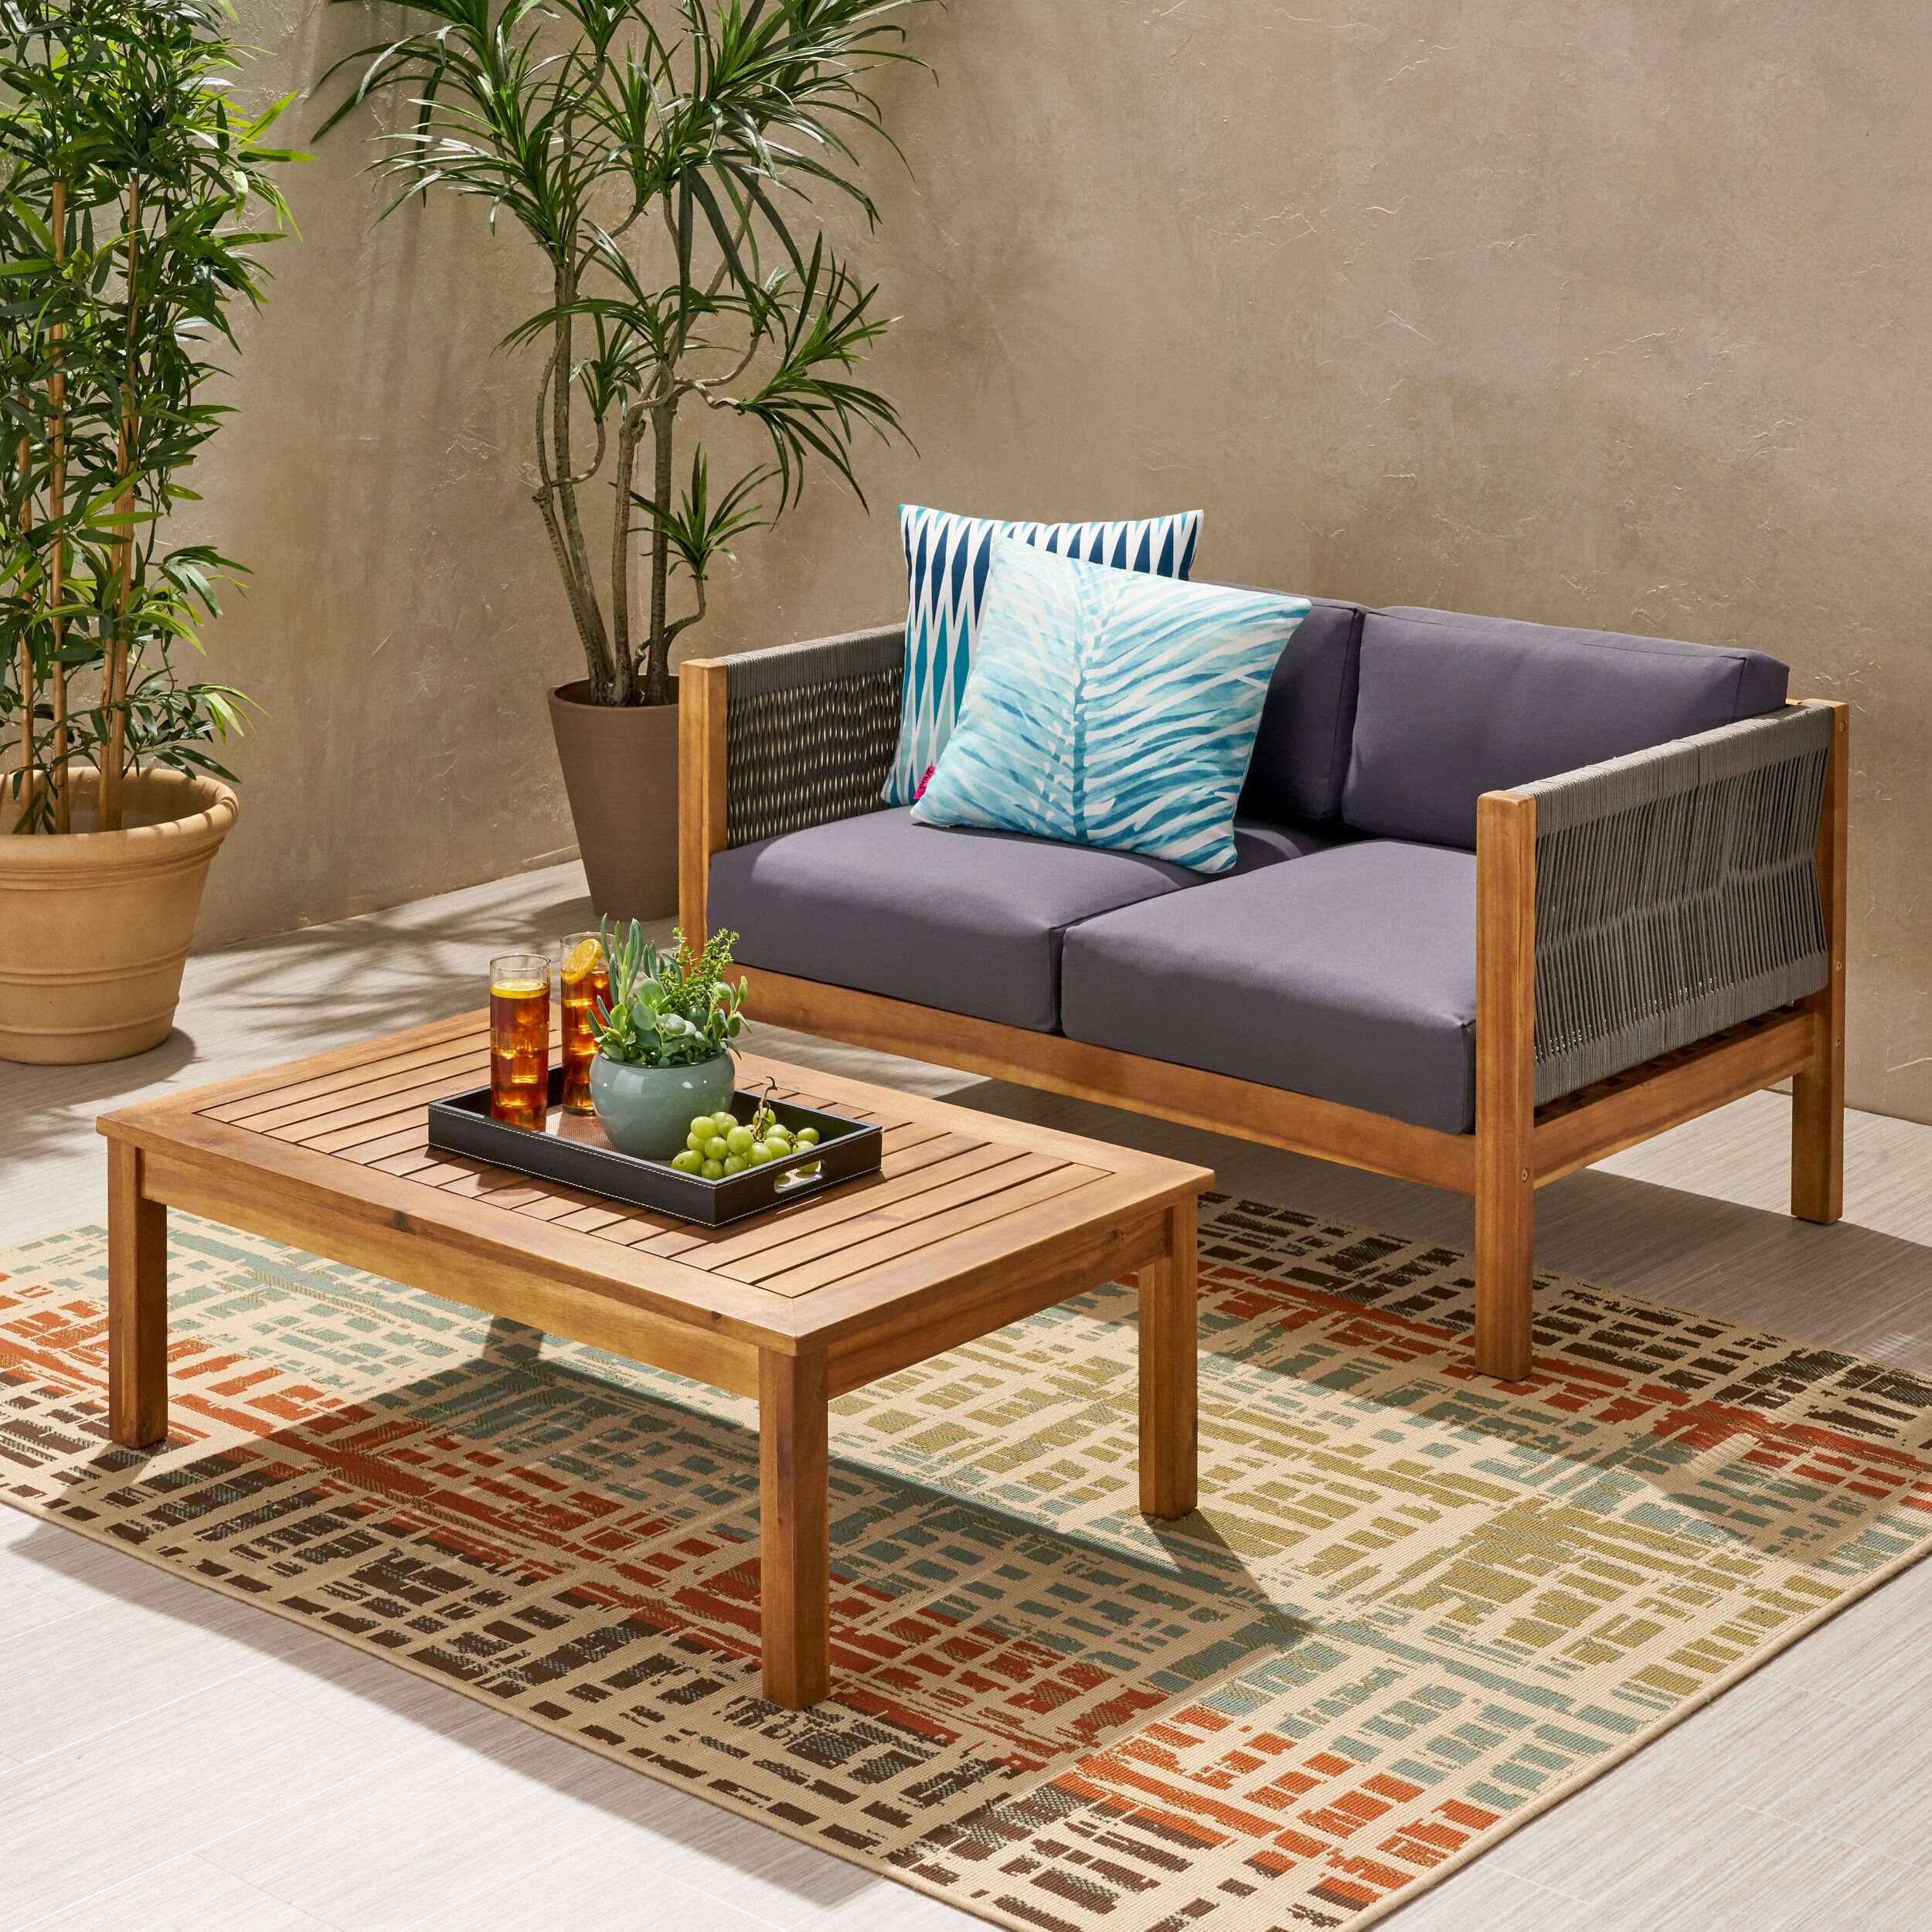 Sand & Stable Tegann 2 – Person Outdoor Seating Group With Cushions &  Reviews | Wayfair For Outdoor Couch Cushions, Throw Pillows And Slat Coffee Table (View 7 of 15)